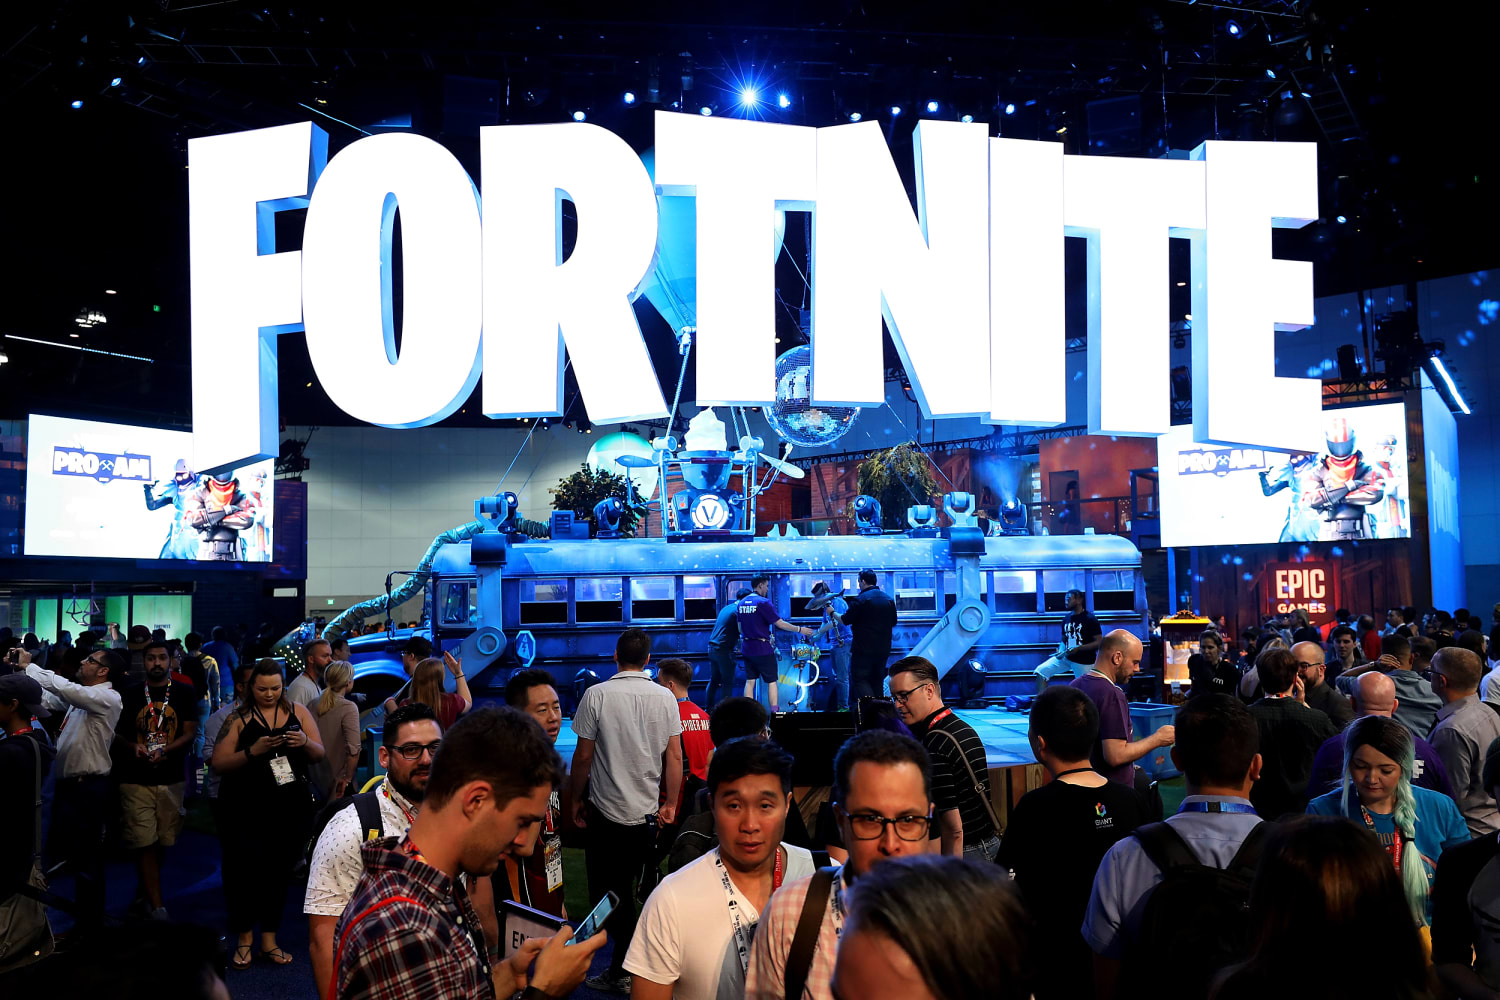 SuperData: Fortnite is now the biggest free-to-play console game ever